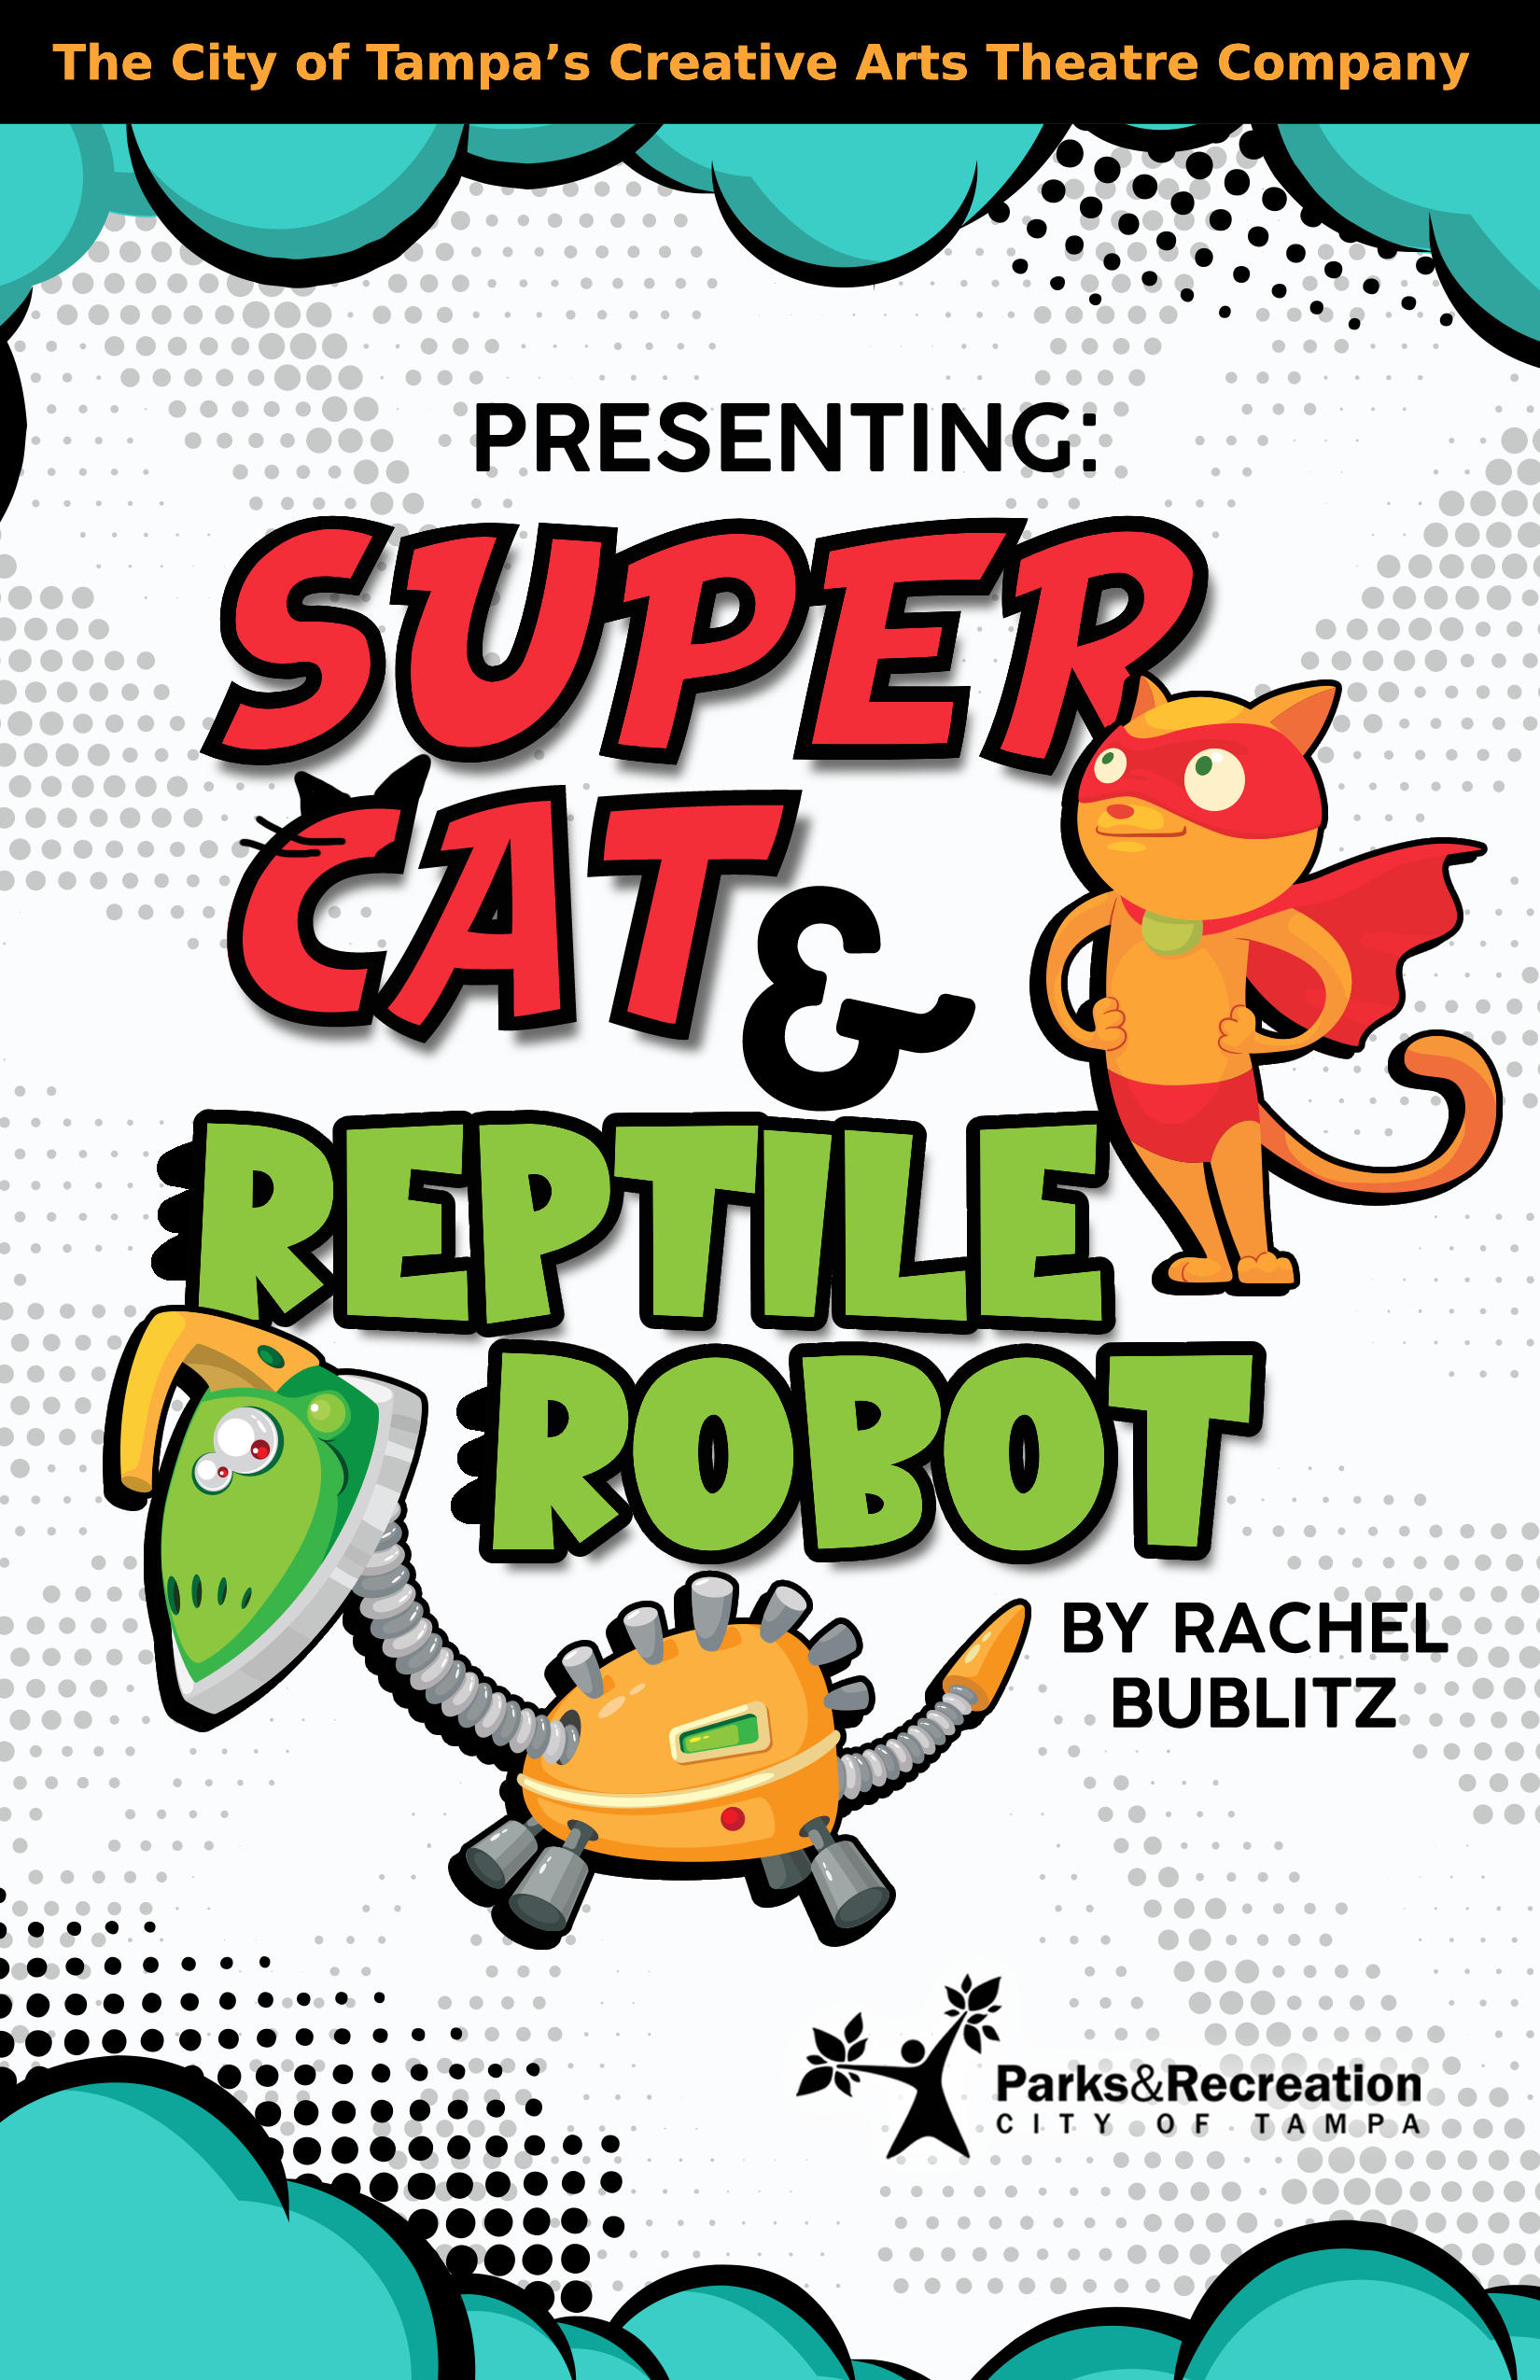 Promotional poster for PRESENTING: SUPER CAT & REPTILE ROBOT with Parks&Recreation City of Tampa.